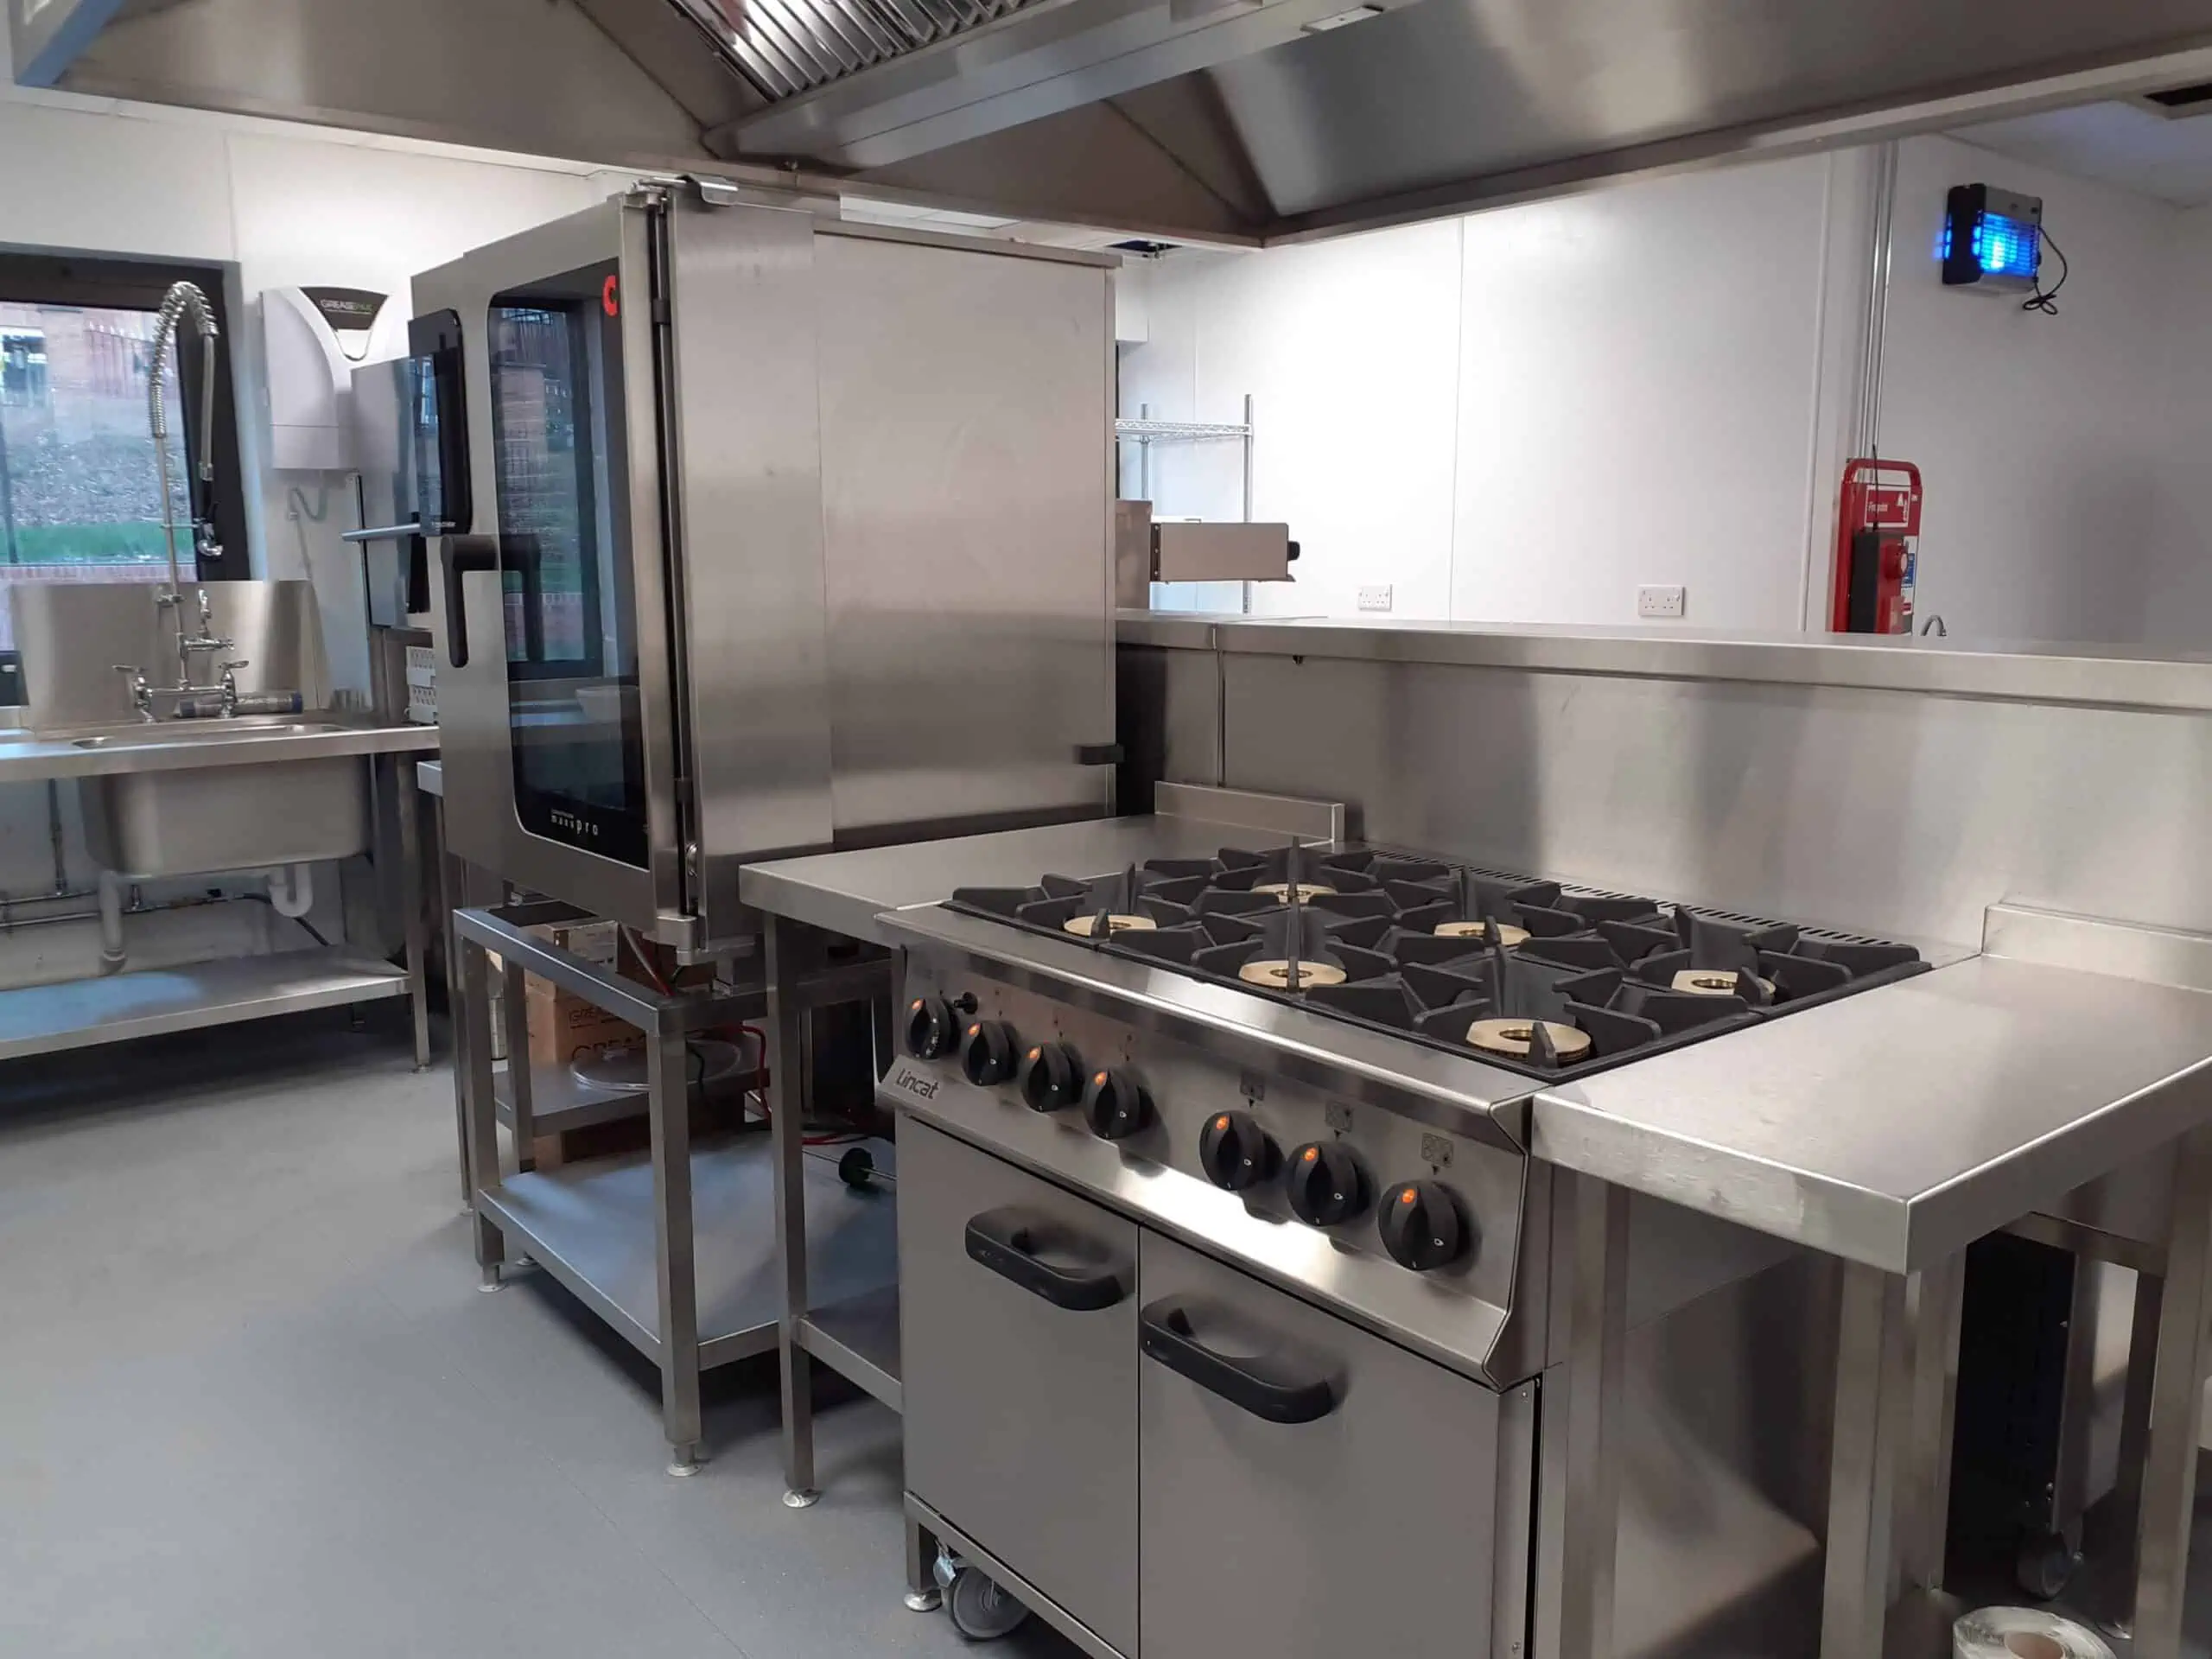 Fully installed bespoke catering equipment including convection oven, washup sink and gas top oven.